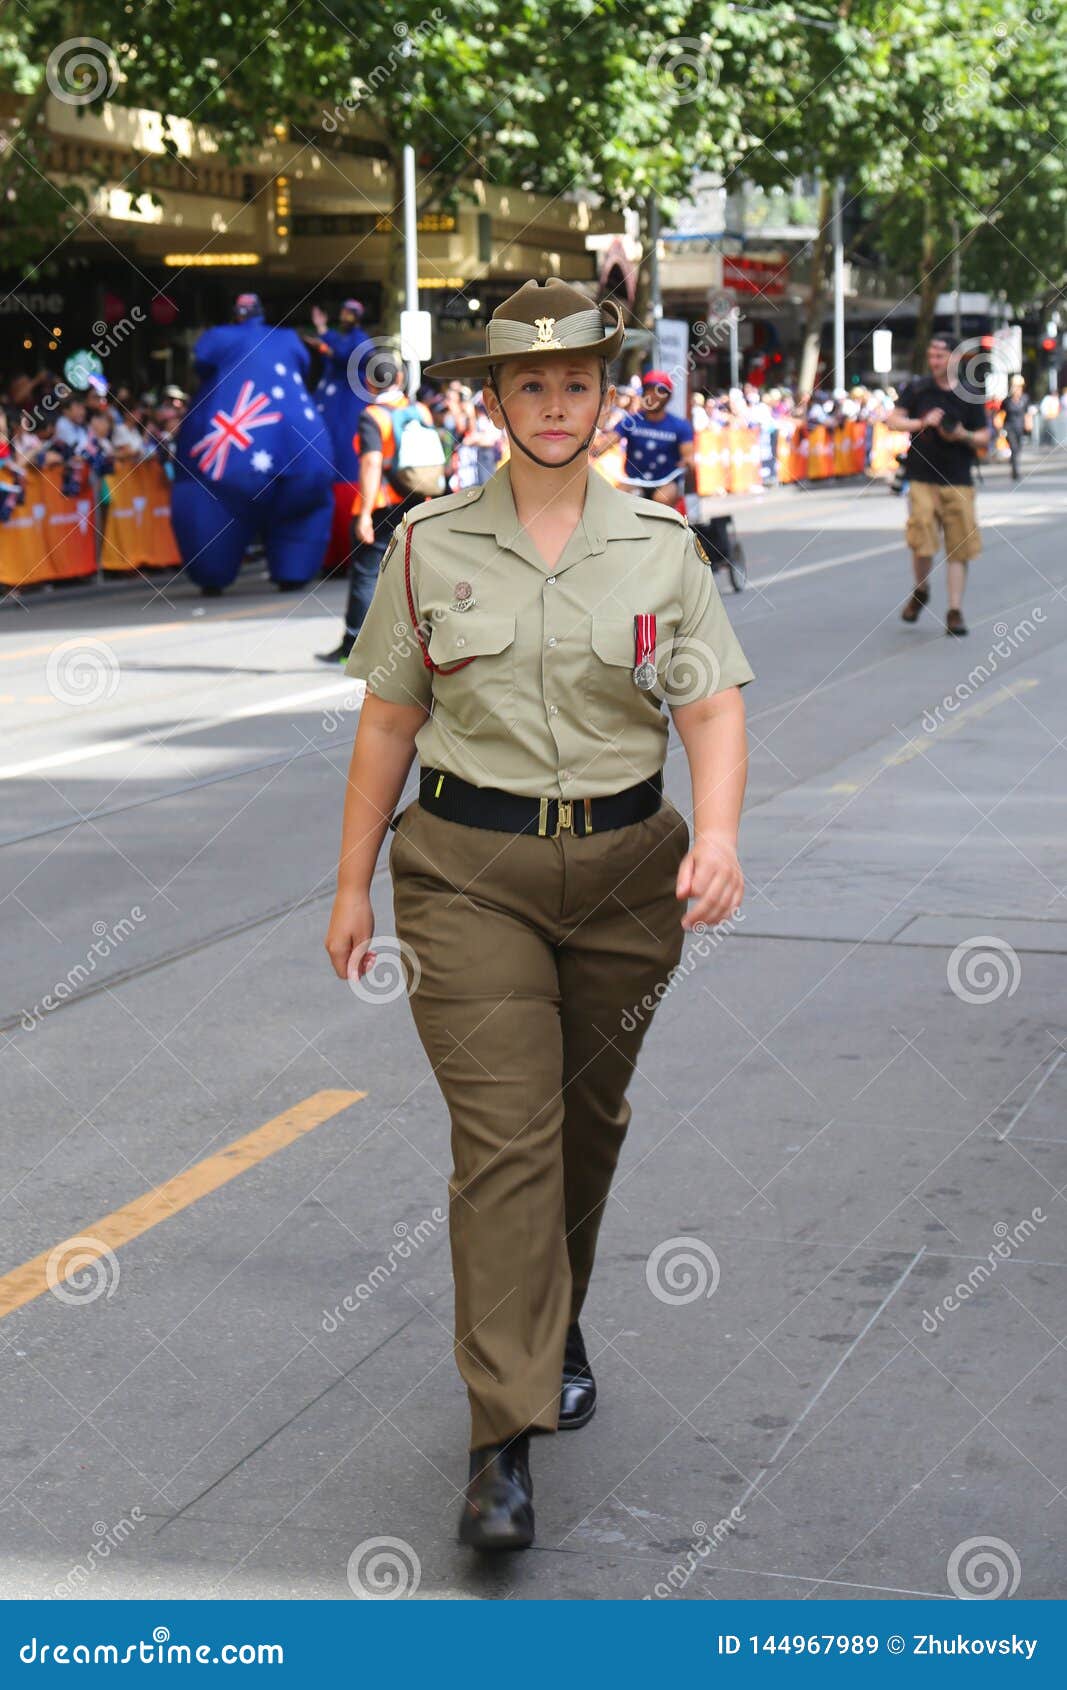 krysantemum revolution Monet Australian Army Officers Participate at 2019 Australia Day Parade in  Melbourne Editorial Stock Image - Image of culture, celebrate: 144967989